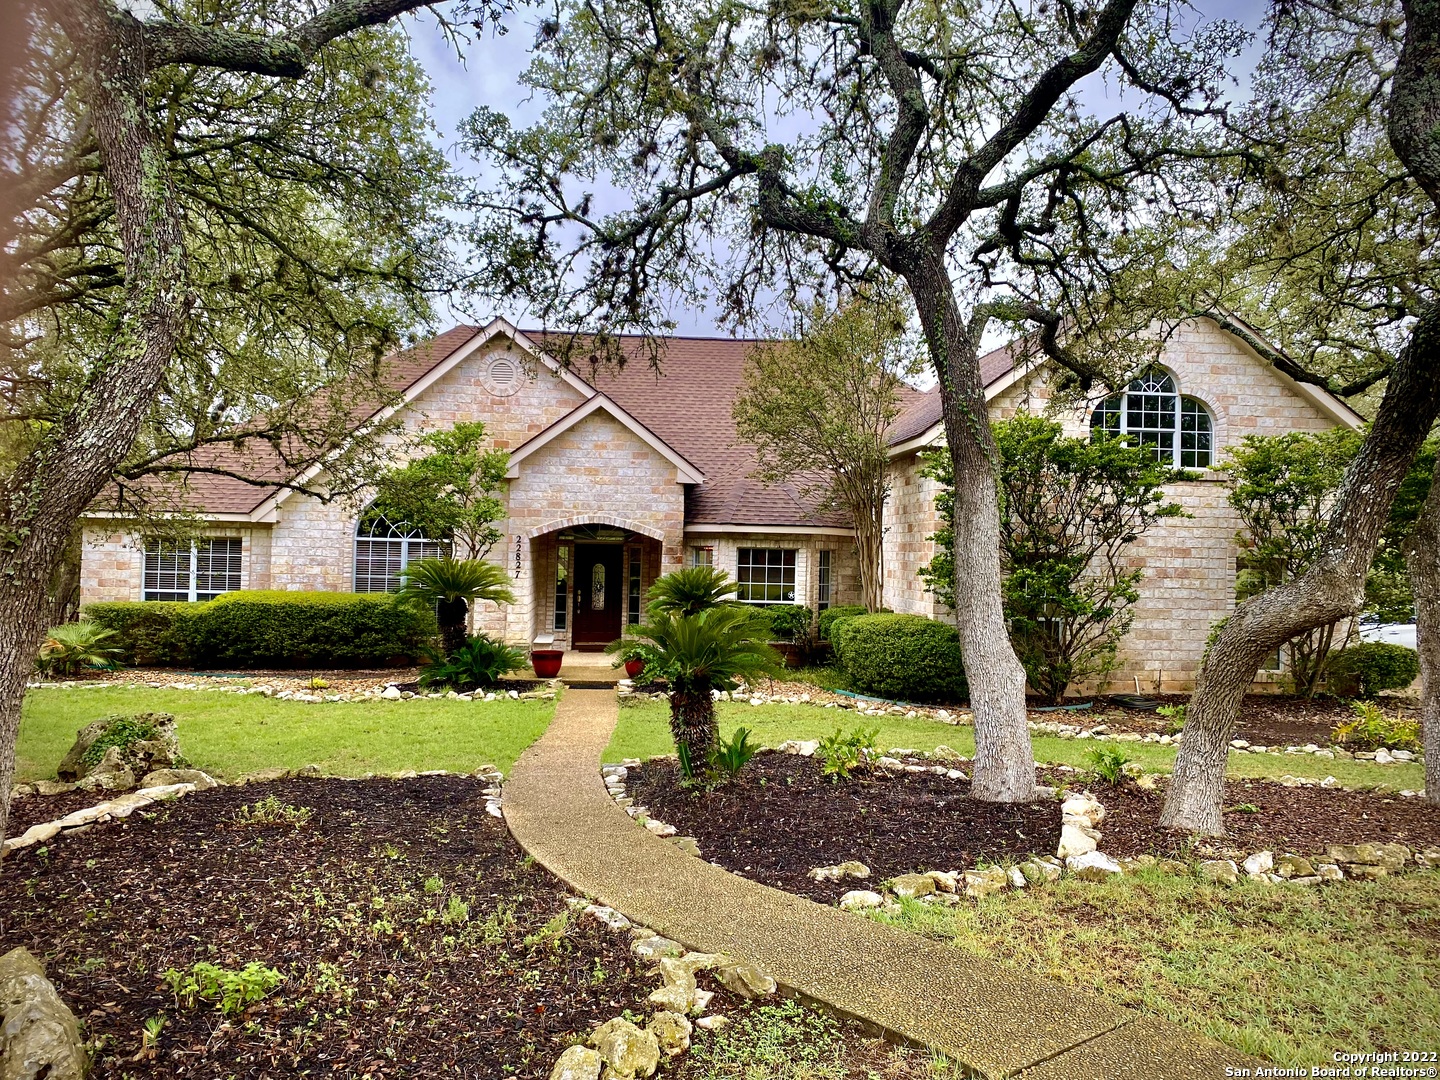 Welcome to your Hill Country Oasis right in the heart of Stone Oak. Tucked into a prestigious gated community, The Forest At Stone Oak, this beautiful home sits on over an acre with 100 classic oak trees. Spacious open floor plan has designer tile throughout, cathedral ceilings, spectacular fireplace and huge windows overlooking the private covered patio and outdoor fireplace. Fresh paint inside and out. Roof replaced in 2016. Ranch-like backyard has a firepit perfect for bonfires and cocktails under the stars. Luxurious Master Suite and spa like bath has a huge jetted soaker tub. All bedrooms are on the main floor. Guest bath completely renovated and tub surround includes designer tile to ceiling. Upstairs bonus room with half bath is perfect for Kids retreat or media room. Breakfast area and island kitchen, with stainless steel appliances including a double oven and a 5 burner gas cook top, makes entertaining a dream! The neighborhood pool is directly across the street...so it's like having your own without the upkeep!!! If you haven't seen this Amazing Neighborhood, You need to schedule a showing appointment and come see it!